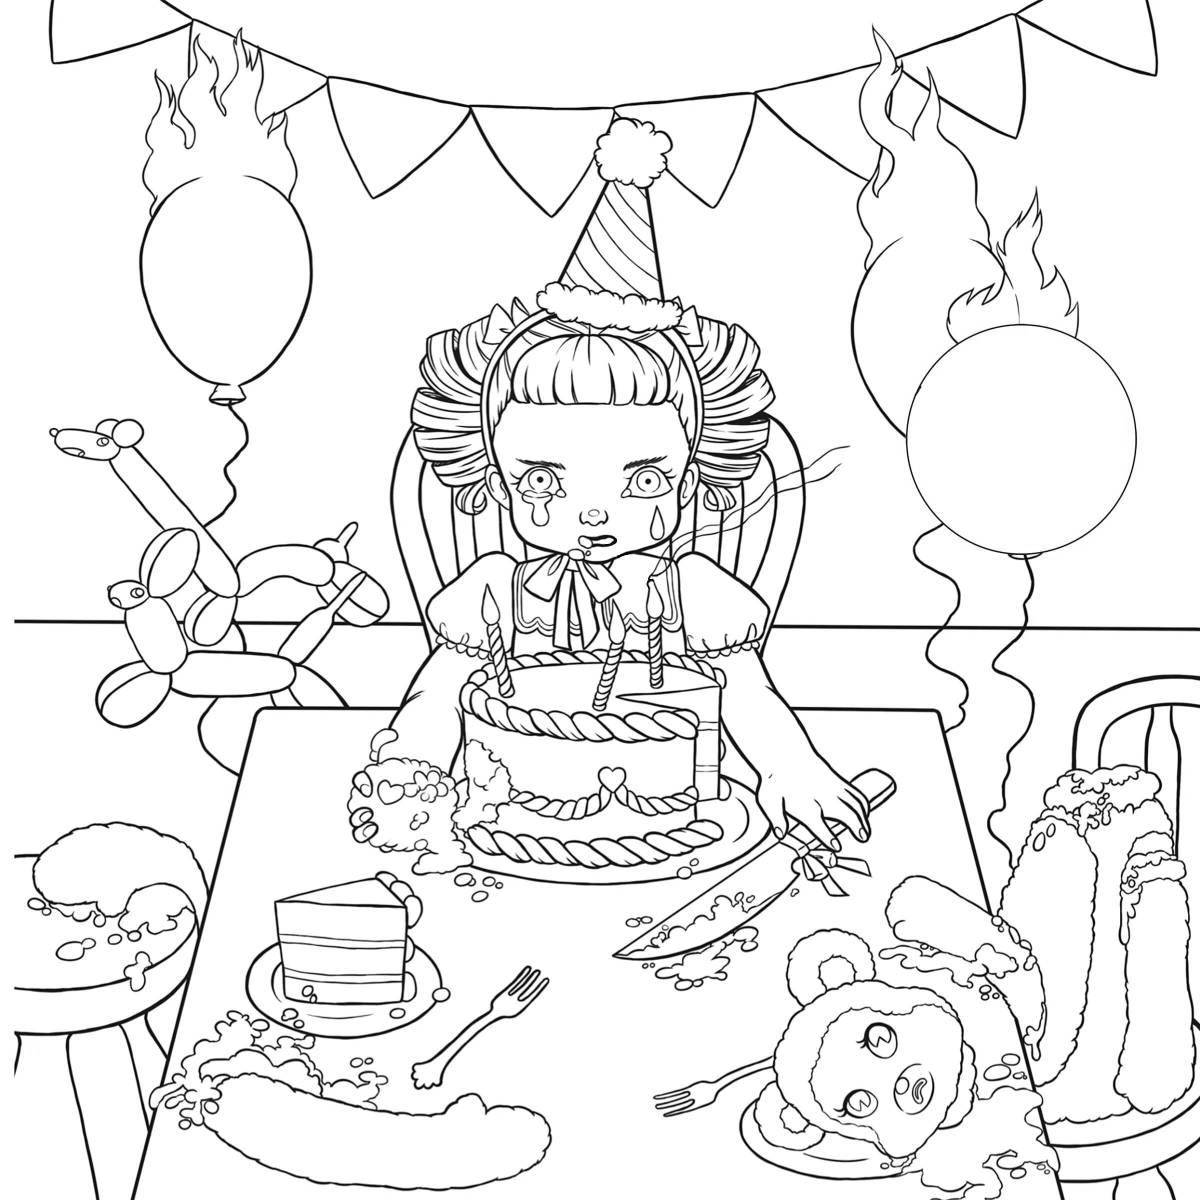 Coloring book sweet charon baby